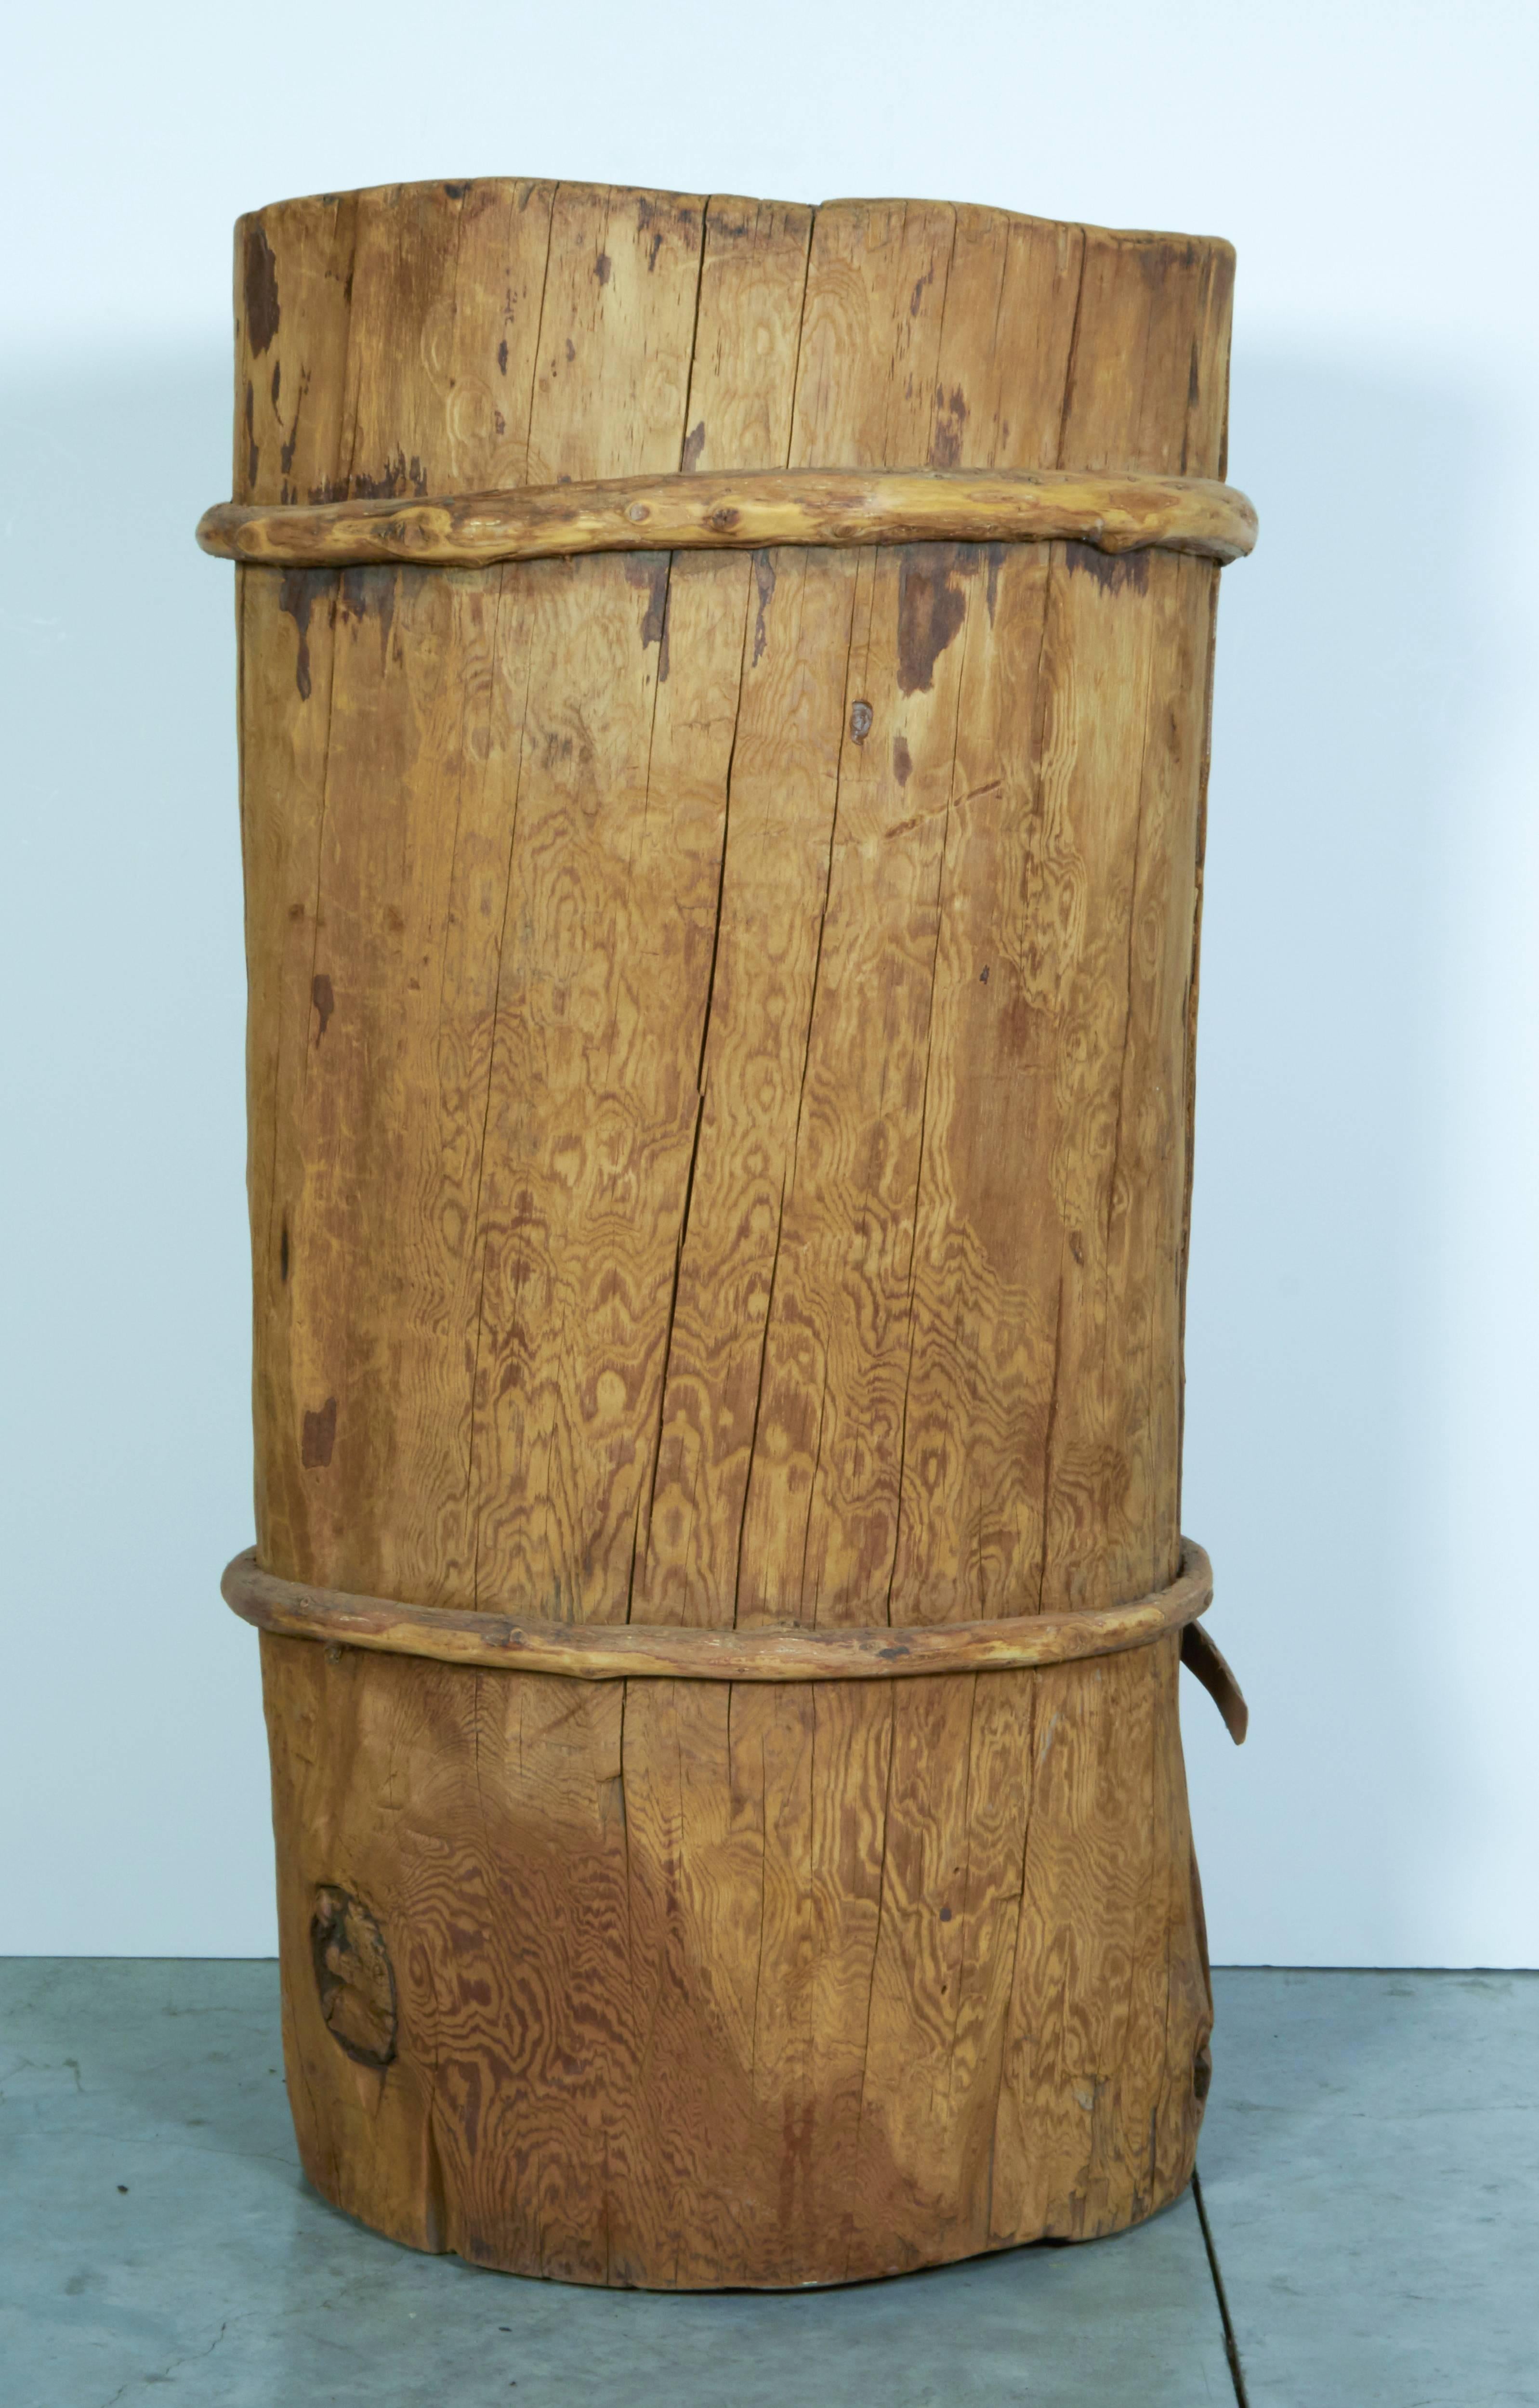 An unusually large yak milk churn from Yunan Province, China, circa 1930. This piece has a beautiful patina from years of use and two beautifully knotted wooden straps.
BT374a.